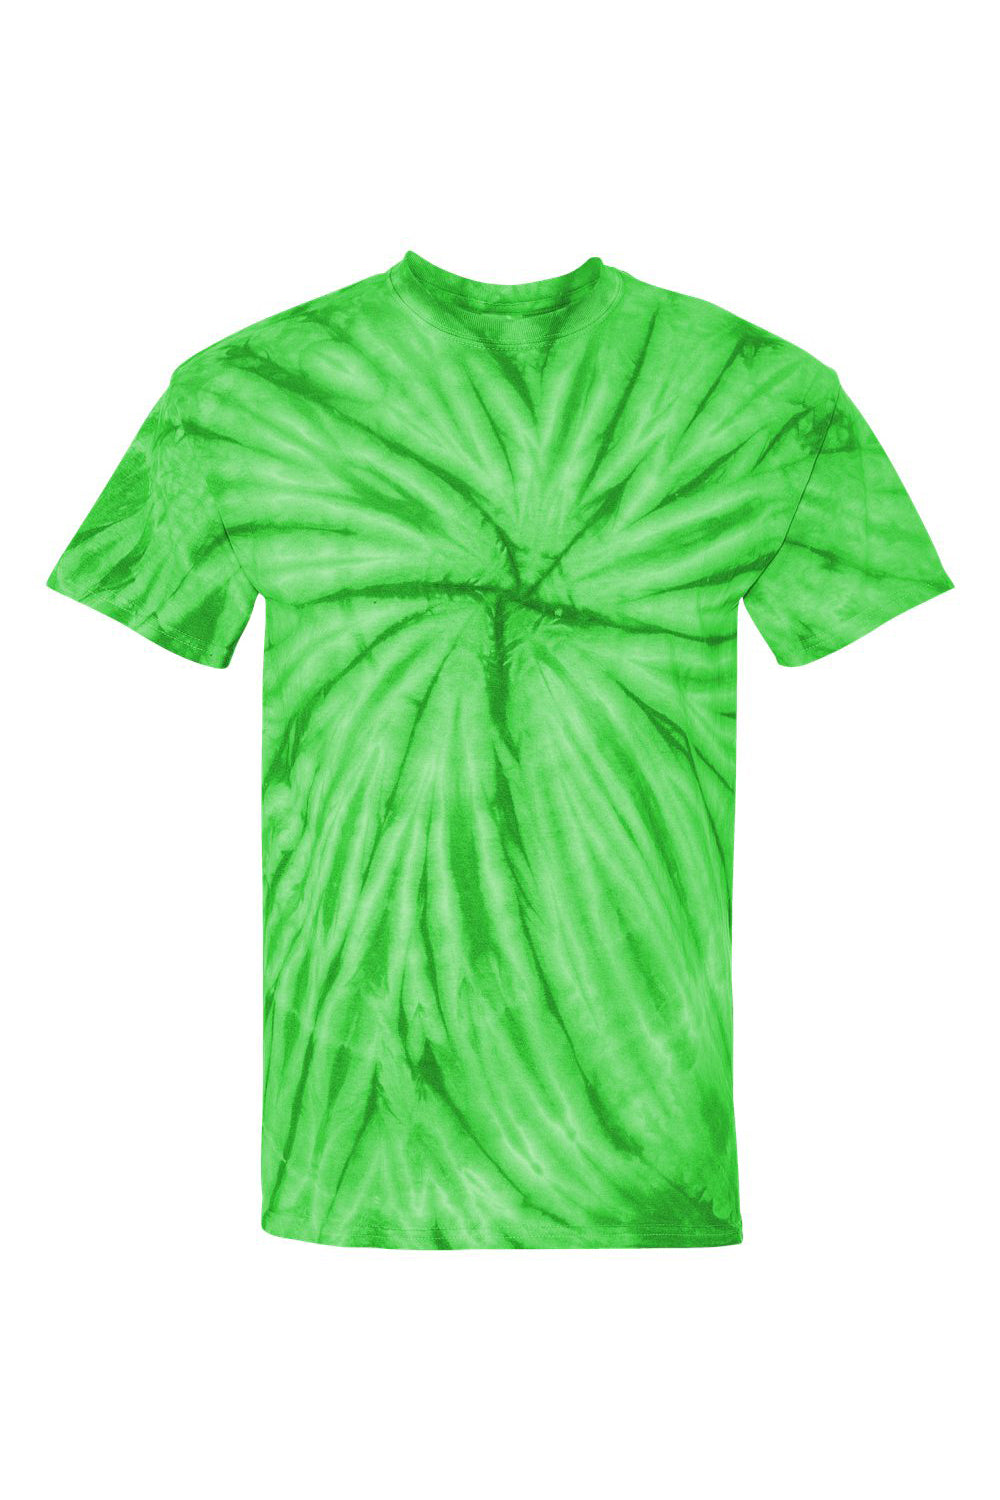 Dyenomite 200CY Mens Cyclone Pinwheel Tie Dyed Short Sleeve Crewneck T-Shirt Lime Green Flat Front